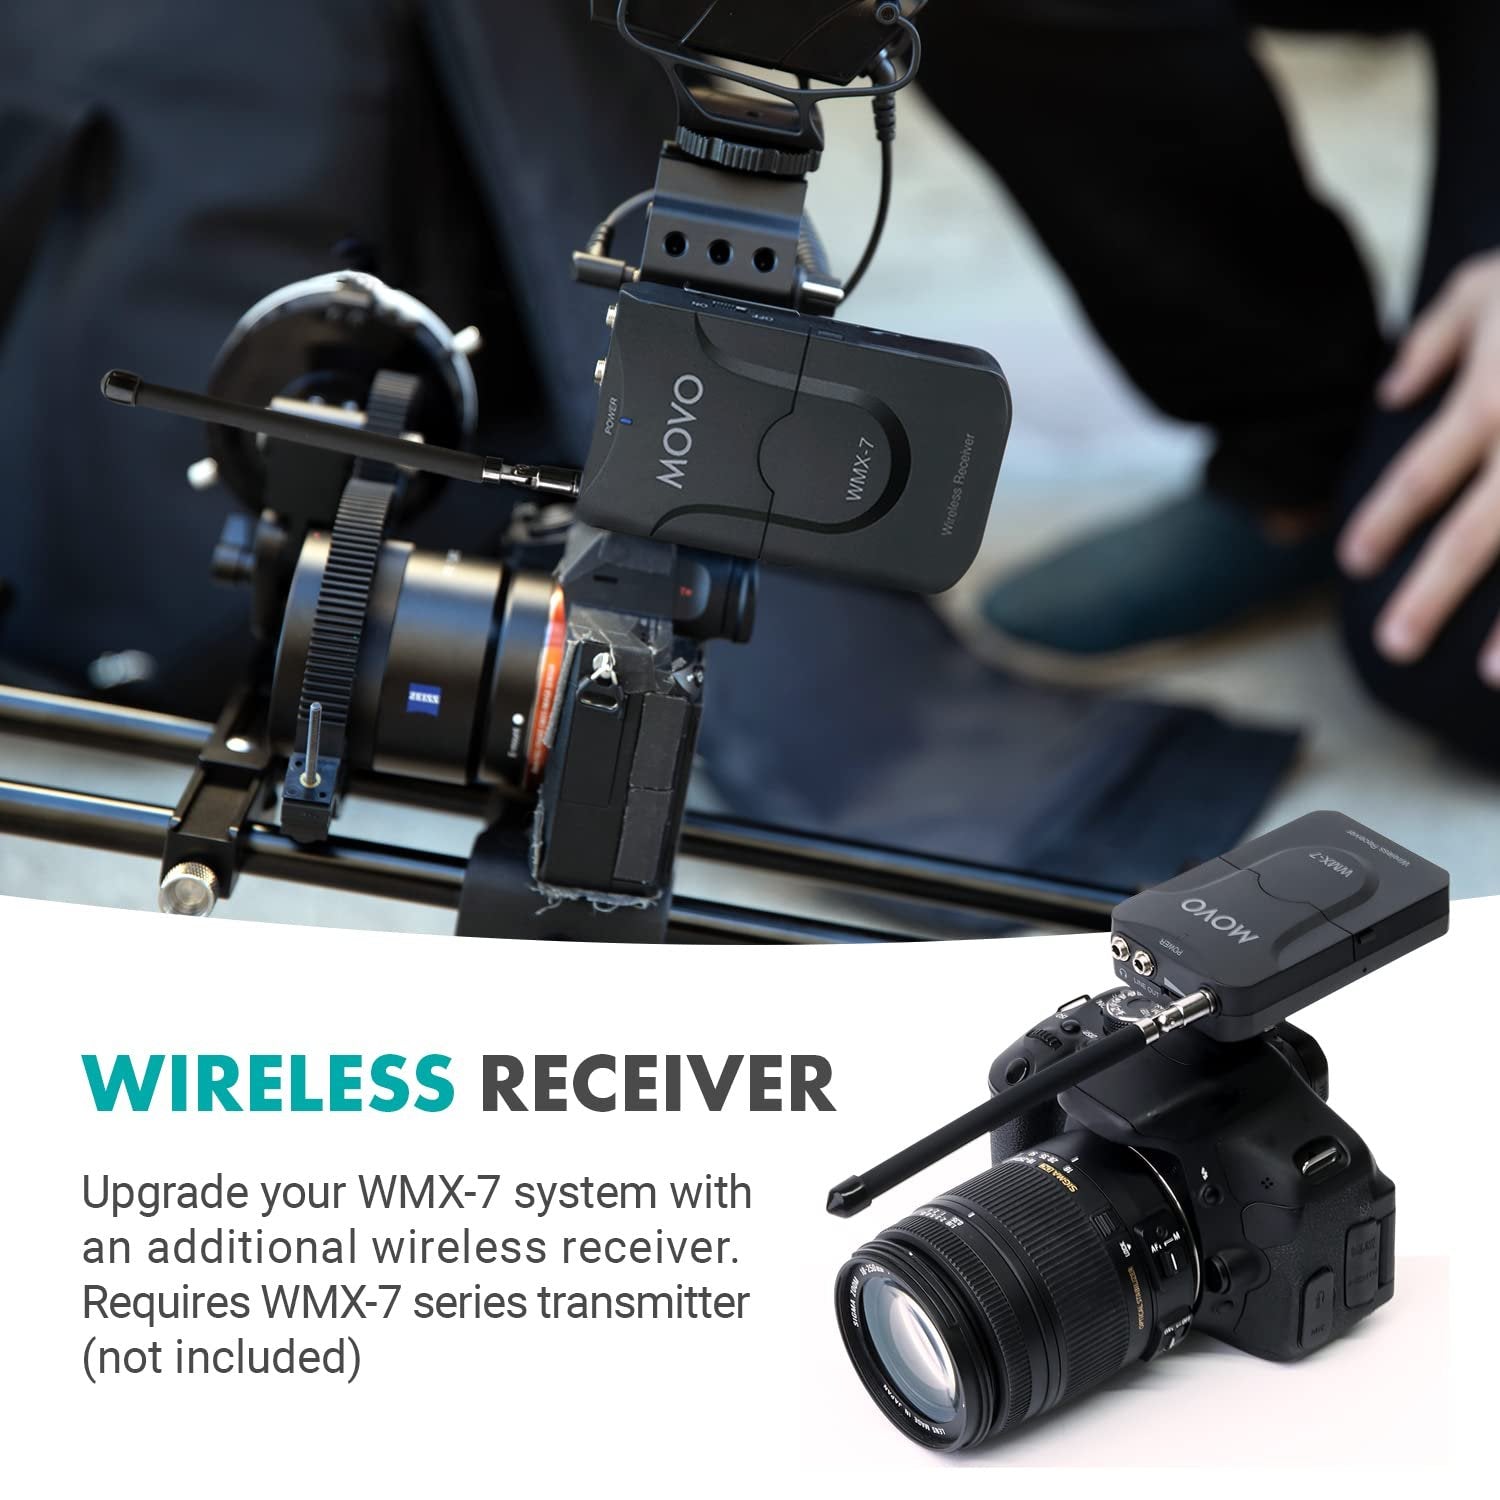 Movo WMX-7 RX Wireless Receiver for WMX-7 VHF Wireless Microphone System (Receiver Only)- Wireless Receiver for Handheld Microphones, Lavalier Mic Transmitters- Bodypack Receiver for Events, Recording